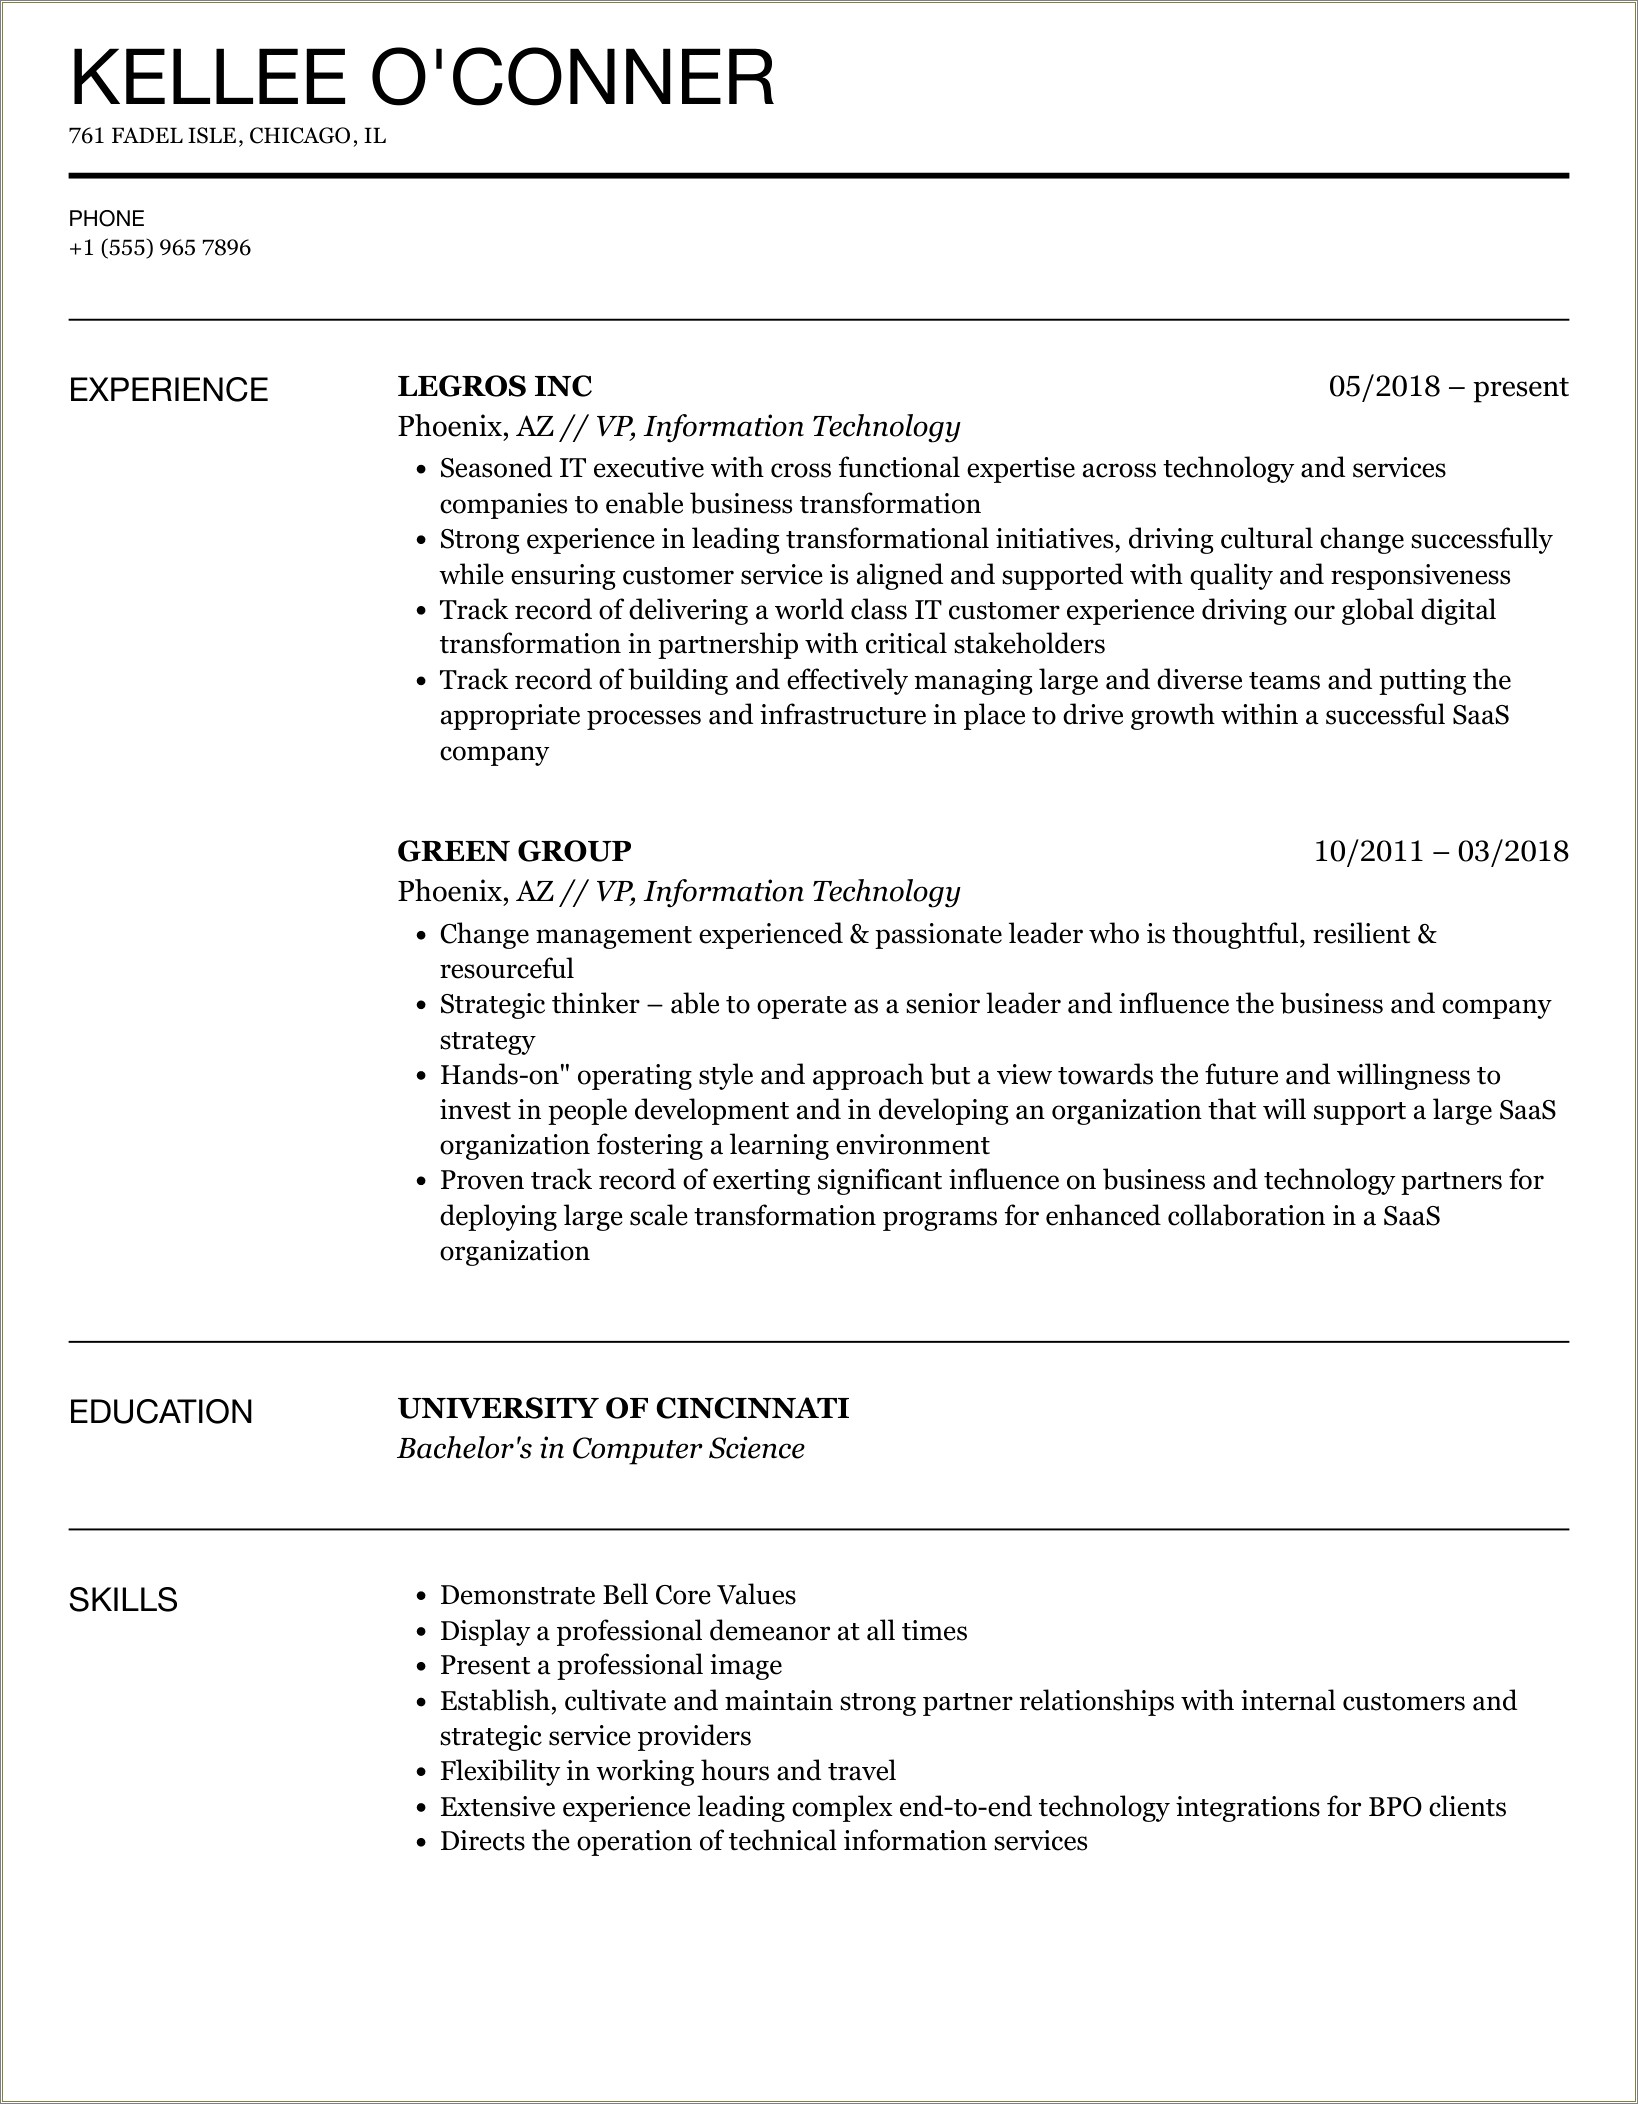 Resume Examples For Vp Informaion Technology Operations